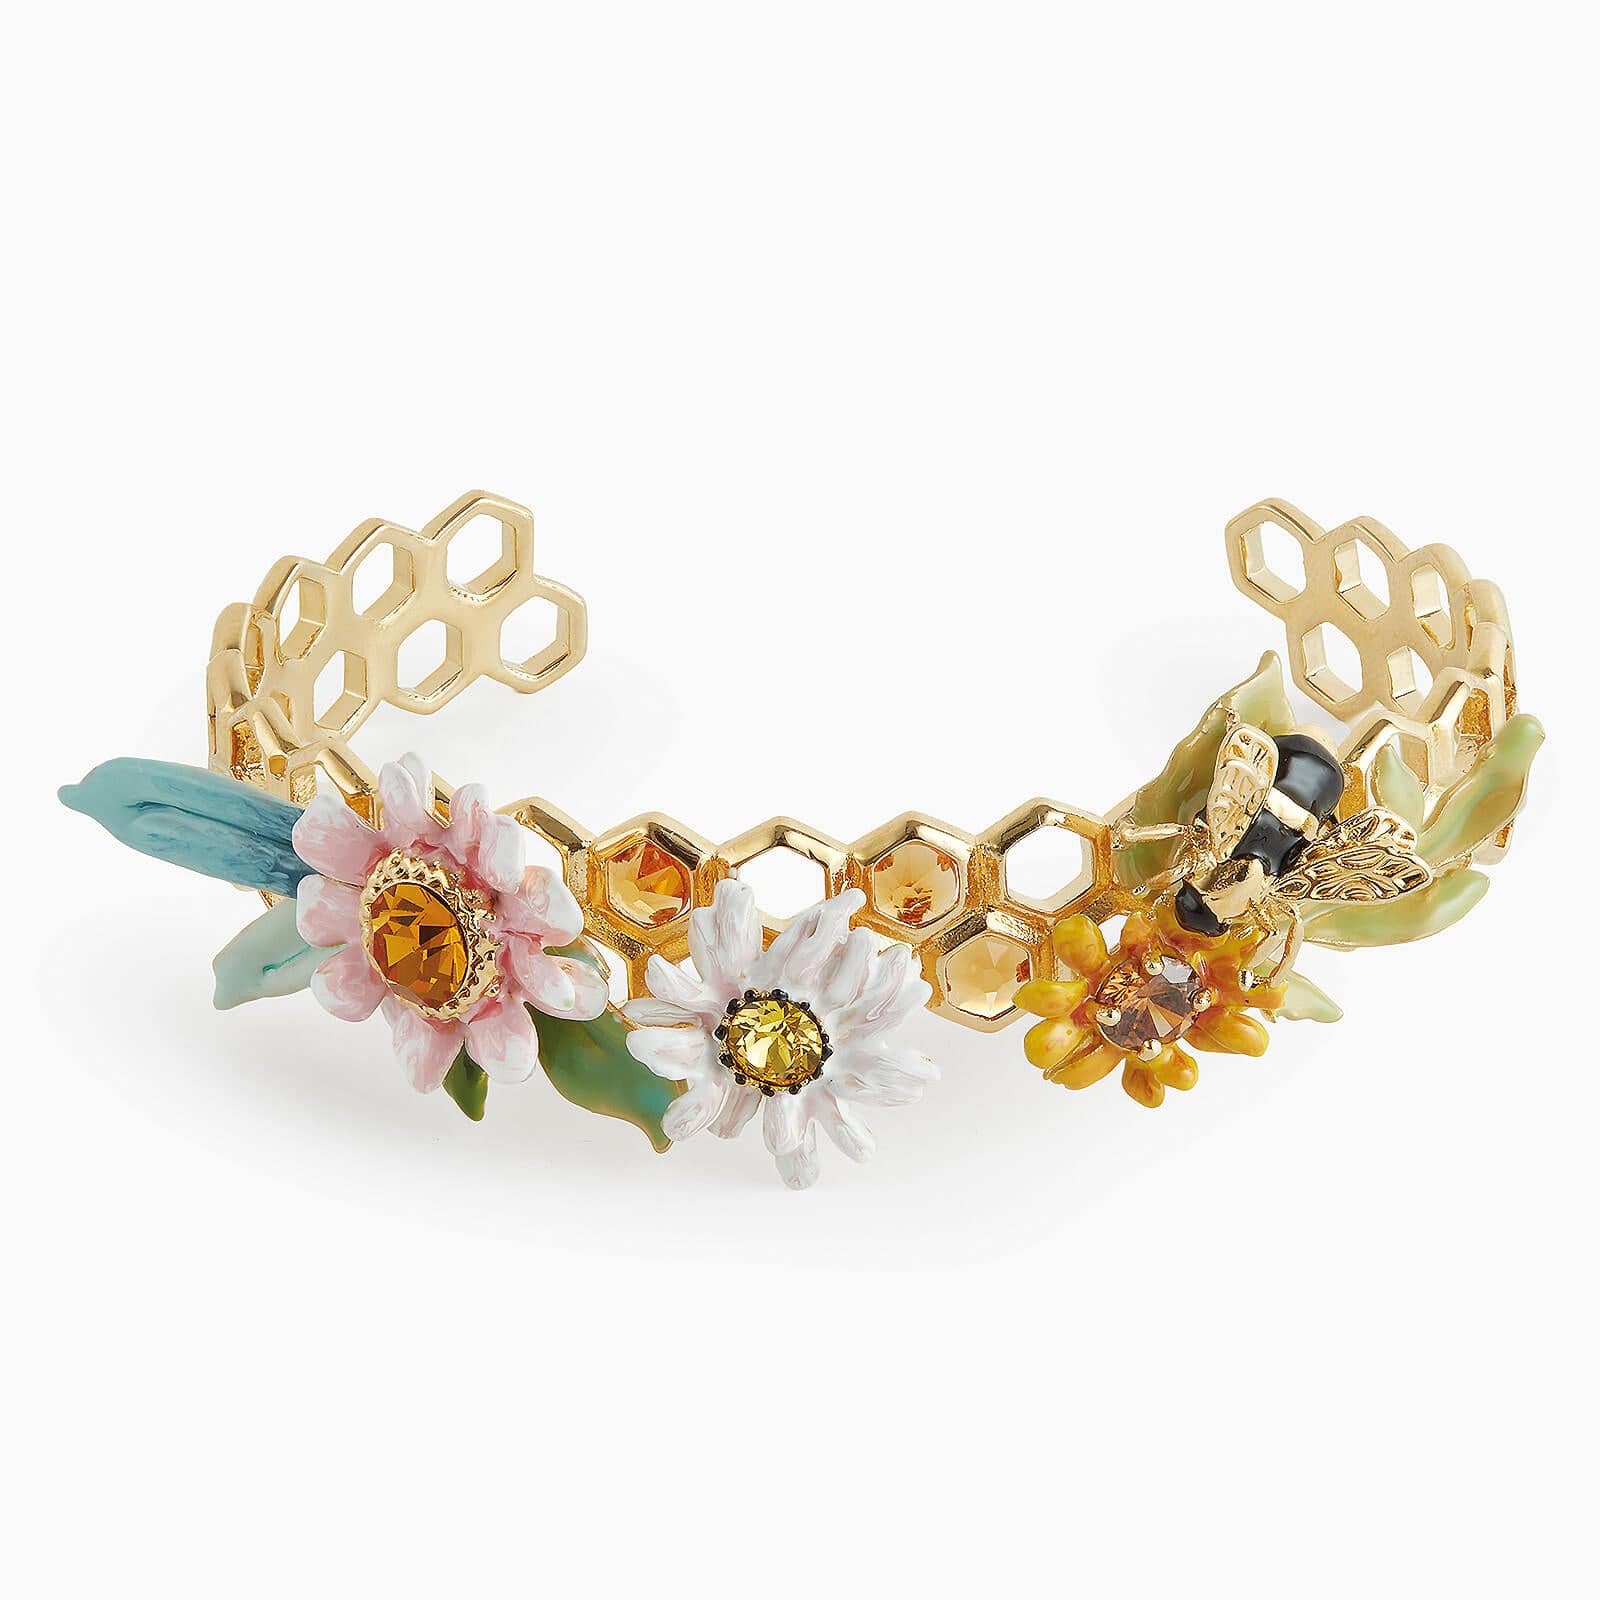 Floral Honeycomb Bracelet - The Gilded Witch